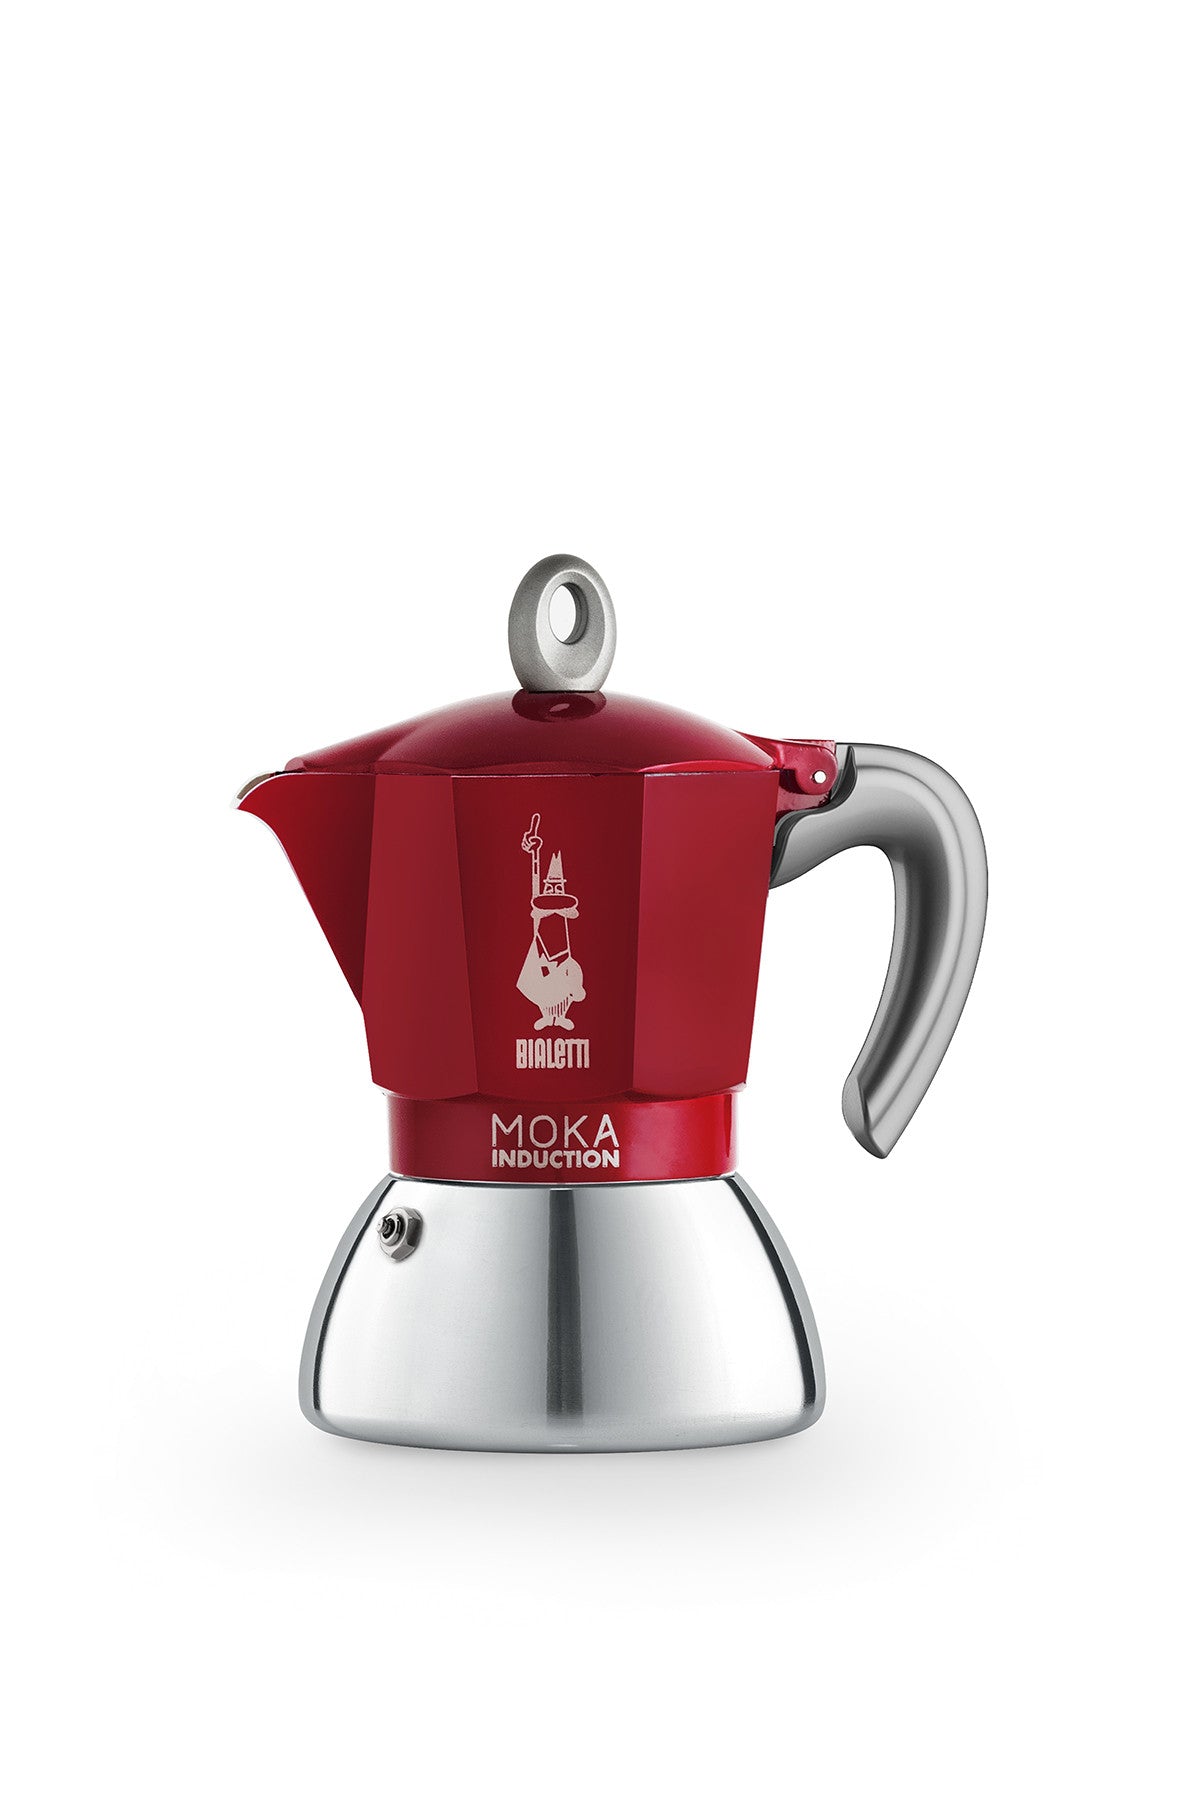 MOKA EXPRESS INDUCTION 4 CUPS, NEW